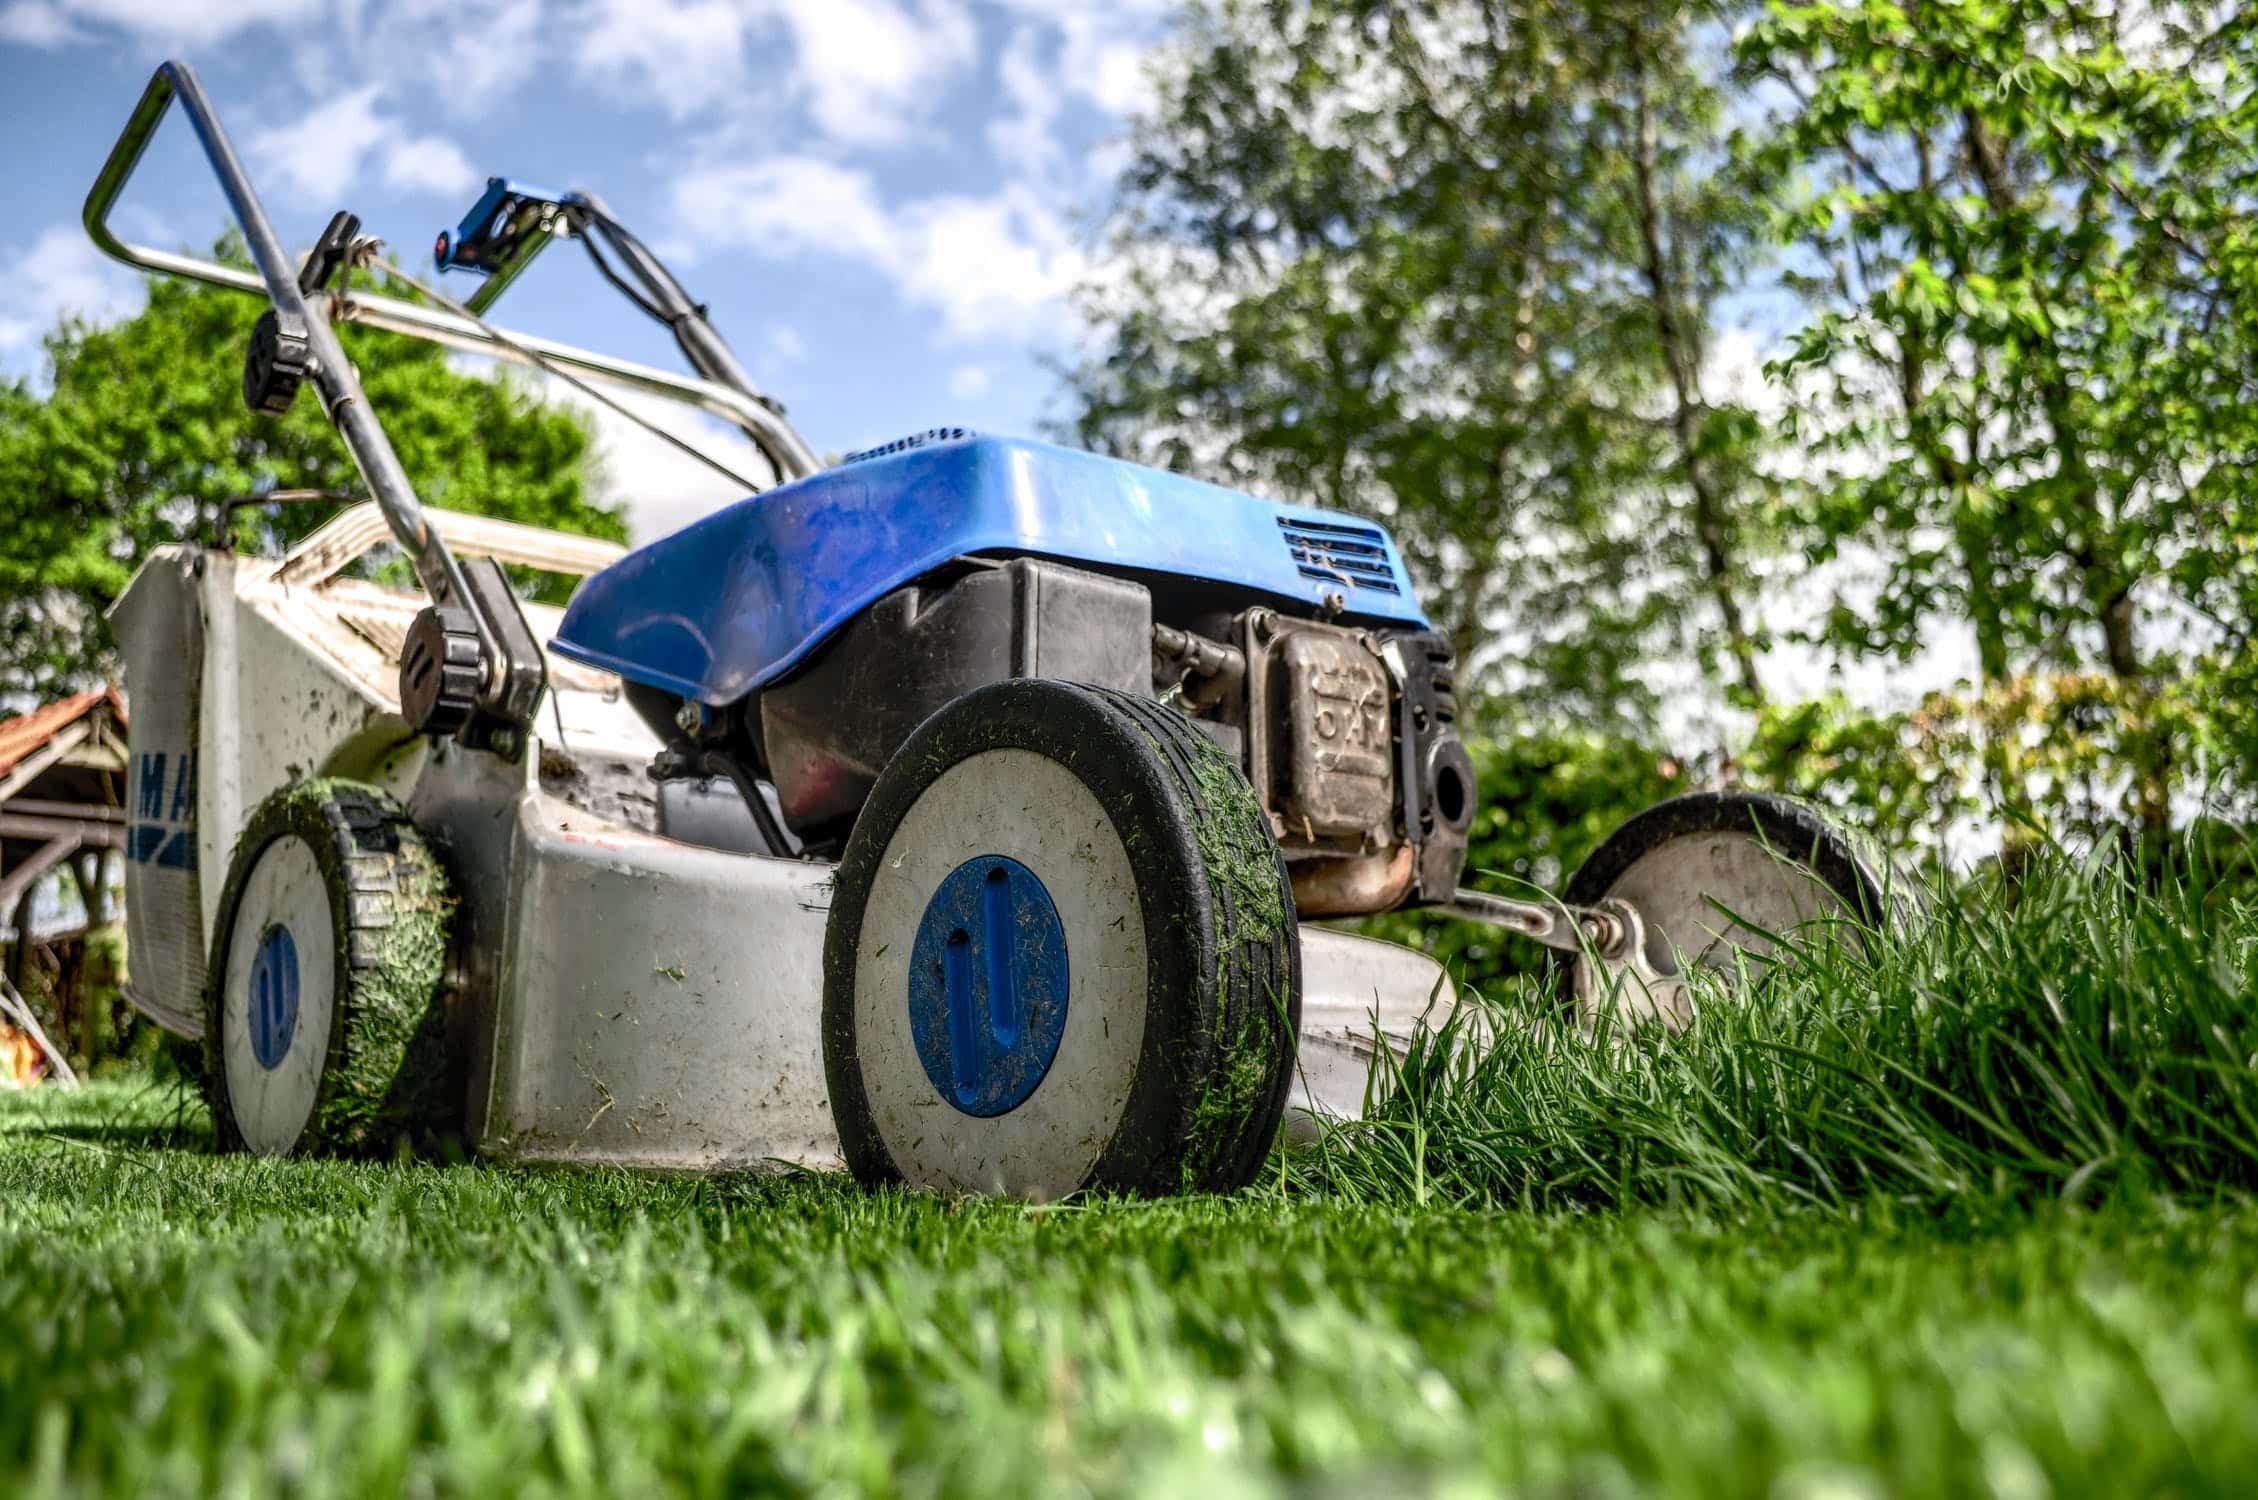 worm's eye view of a lawnmower